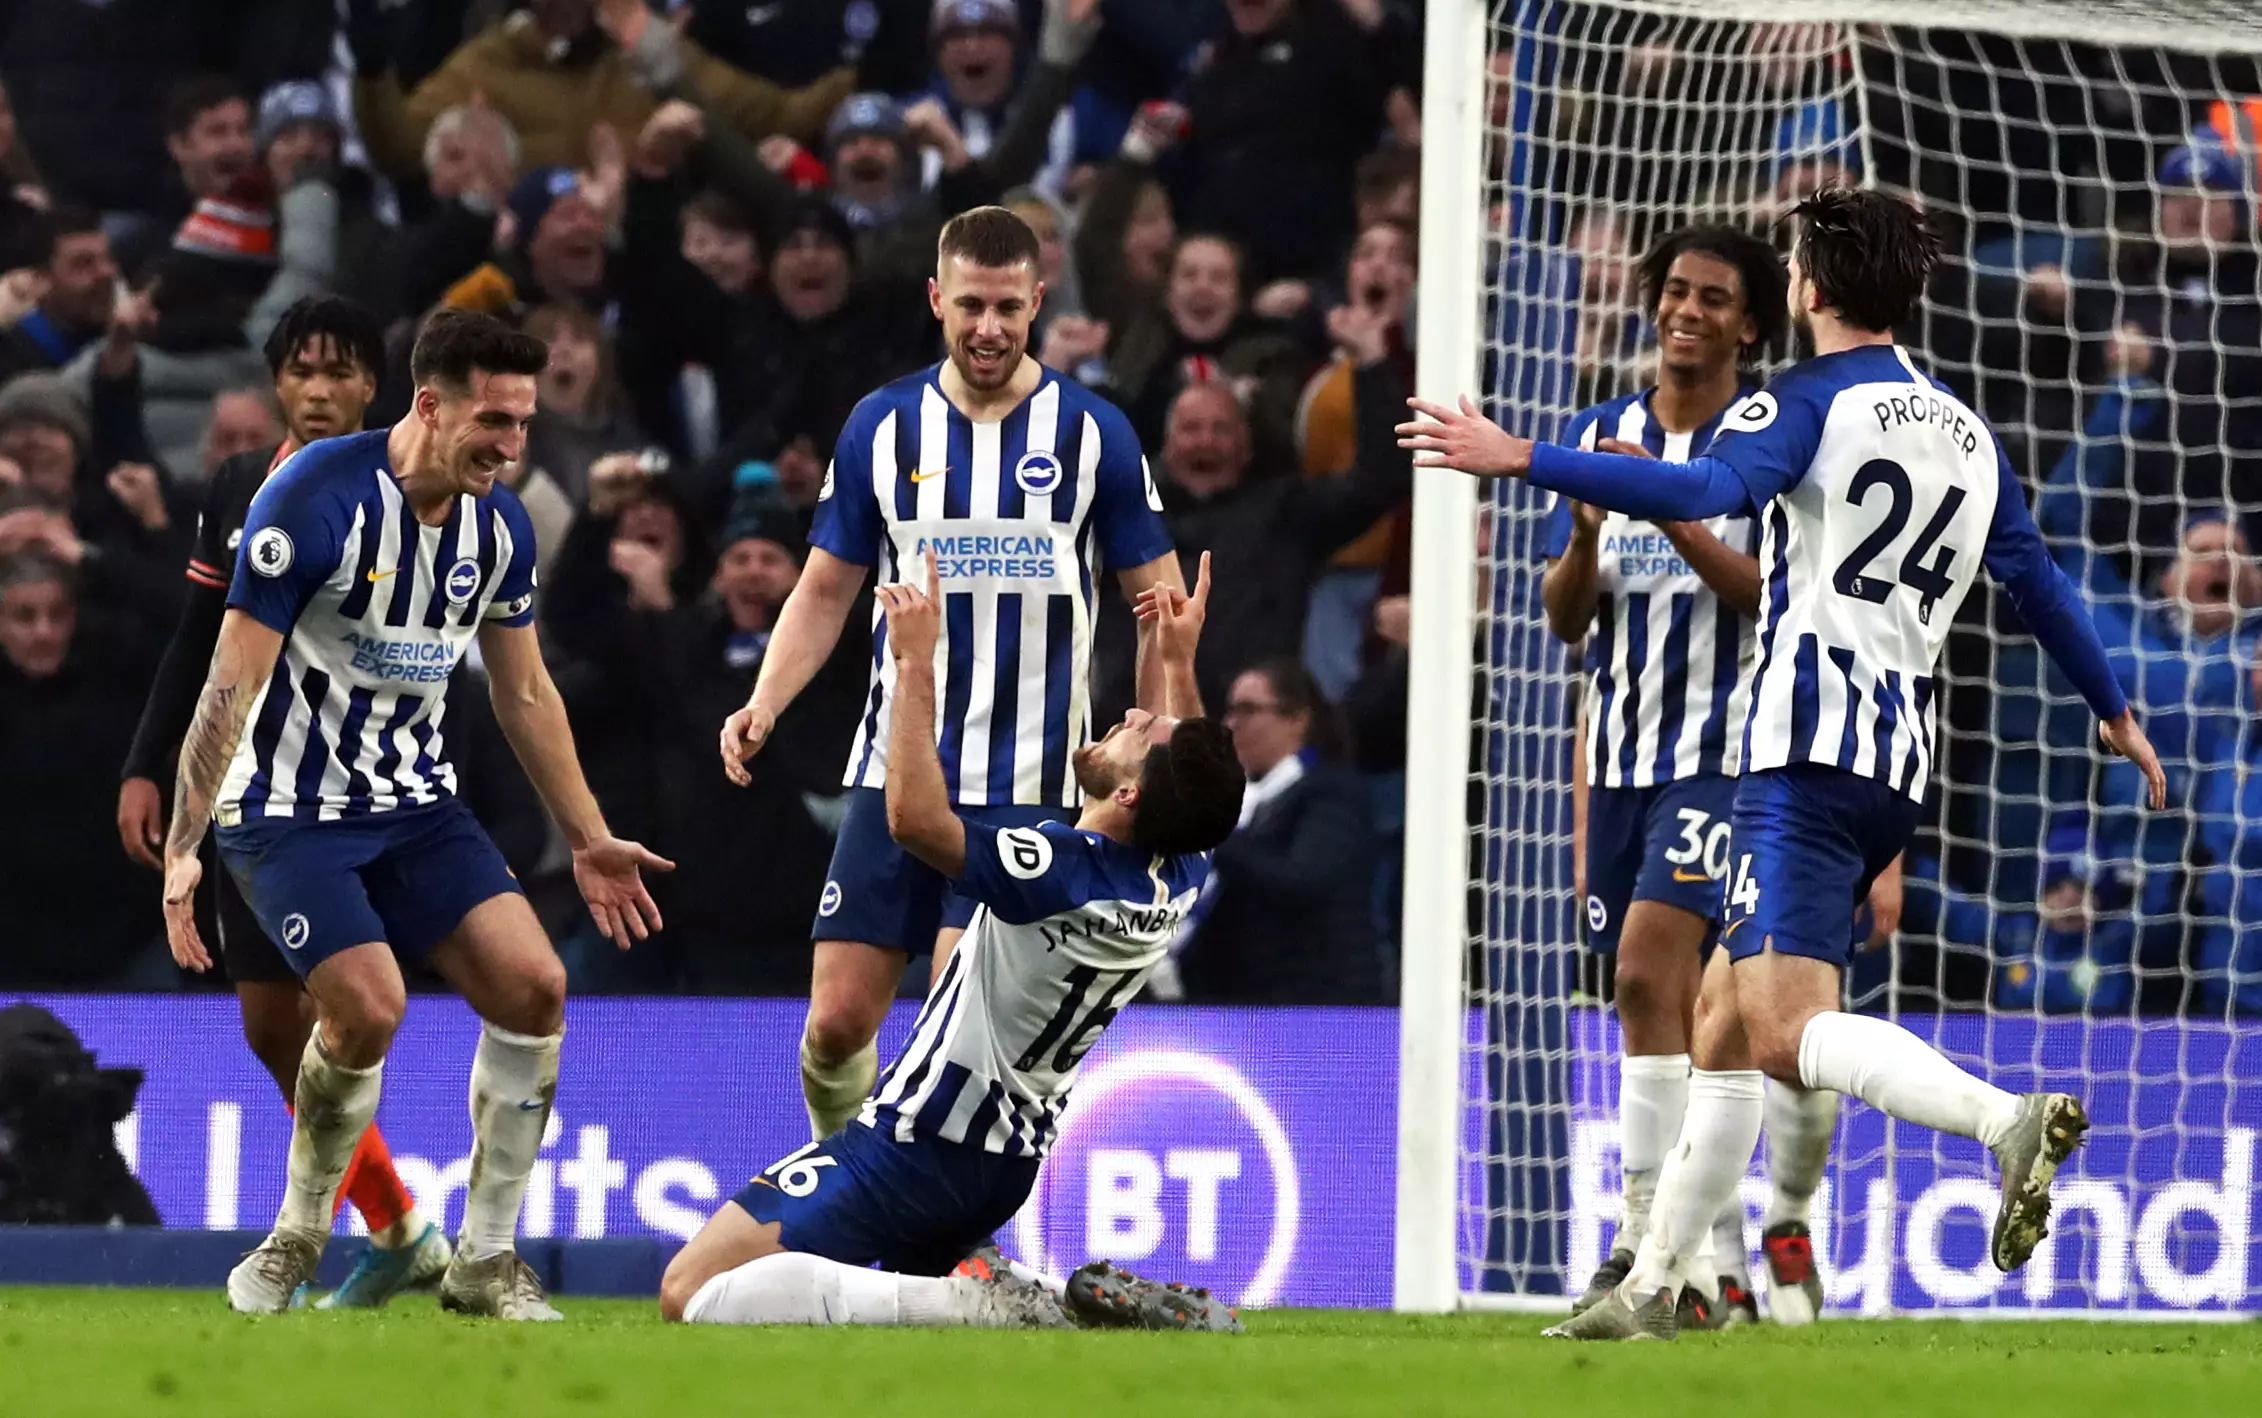 Brighton celebrate their brilliant equaliser which earned them a point